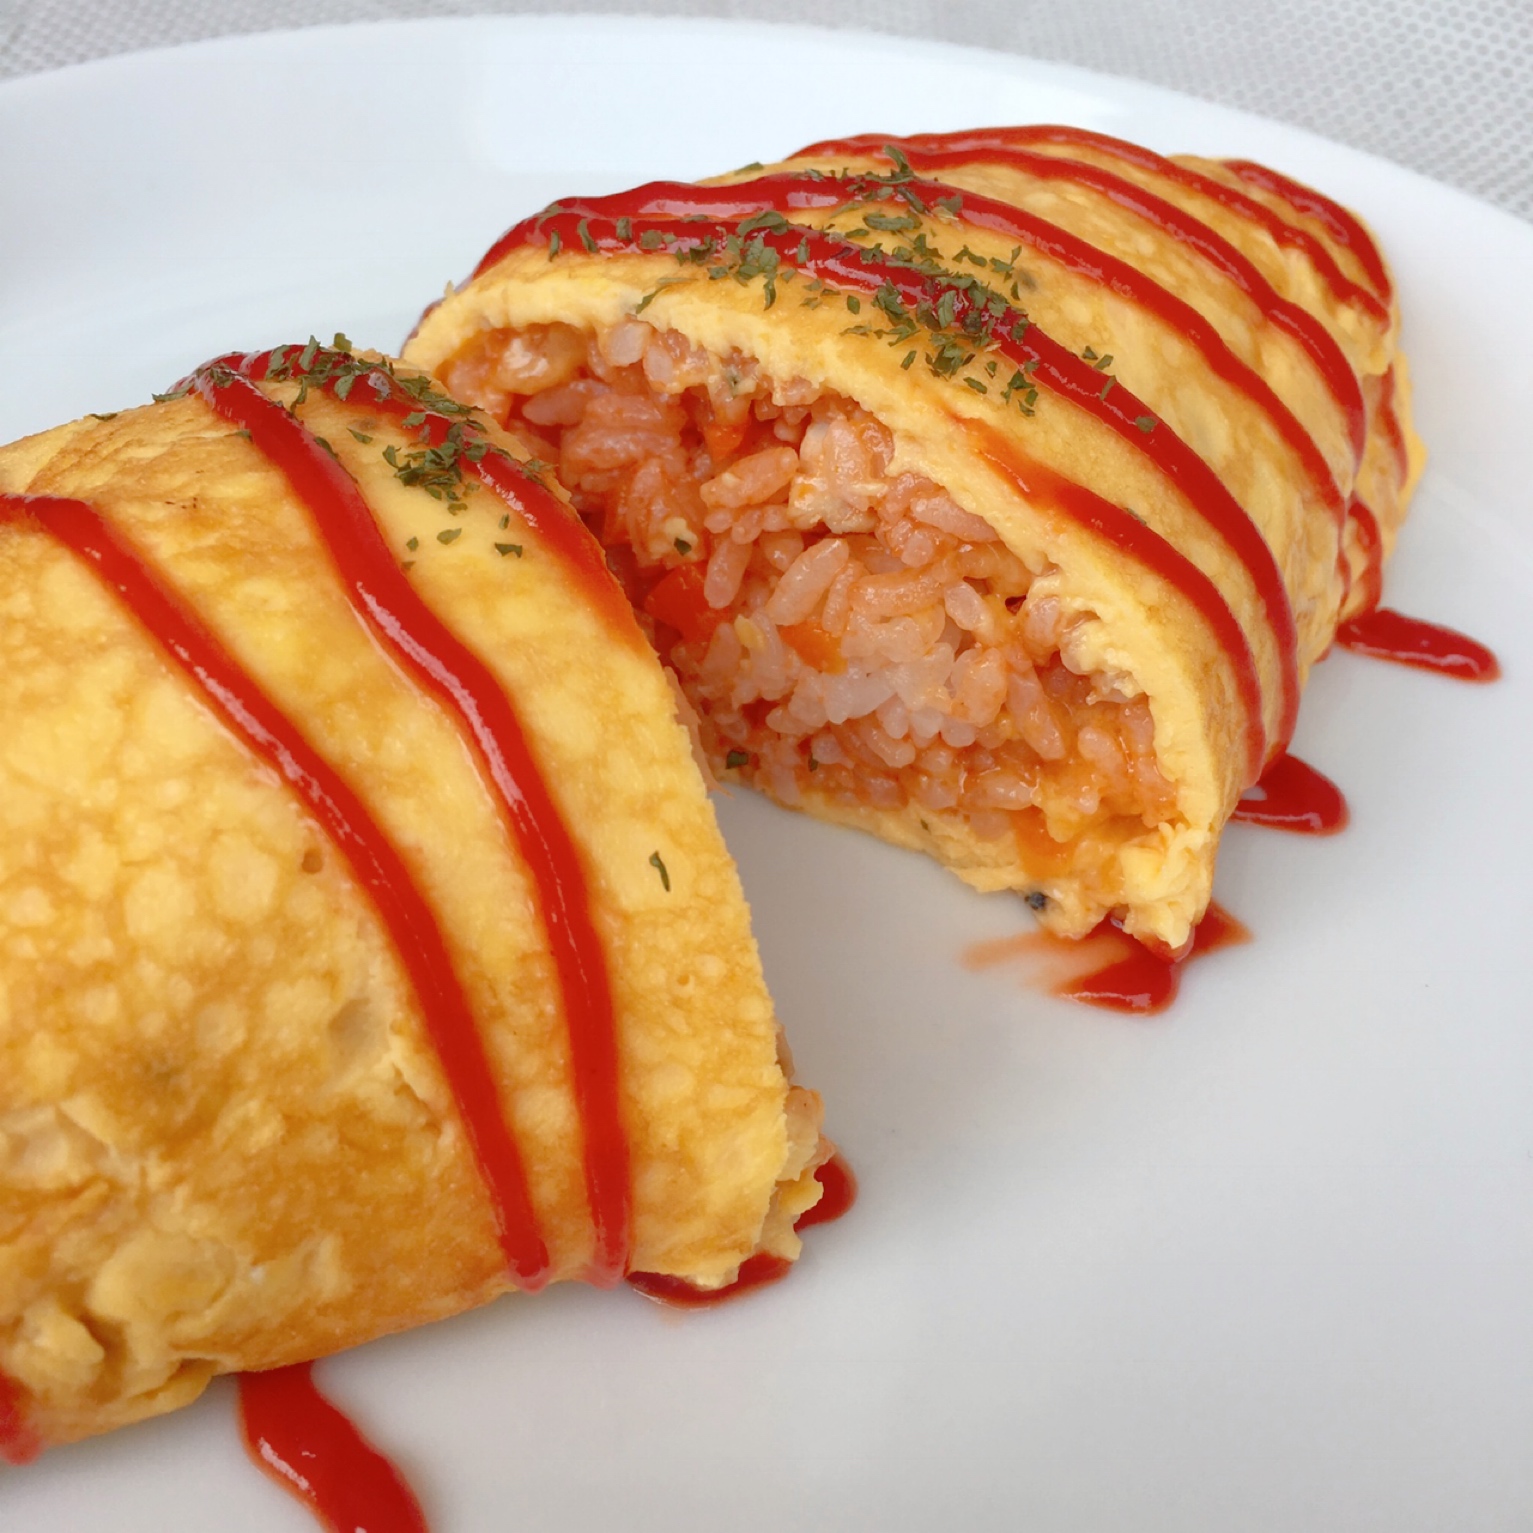 It is a dish of rice seasoned with ketchup wrapped in an egg.